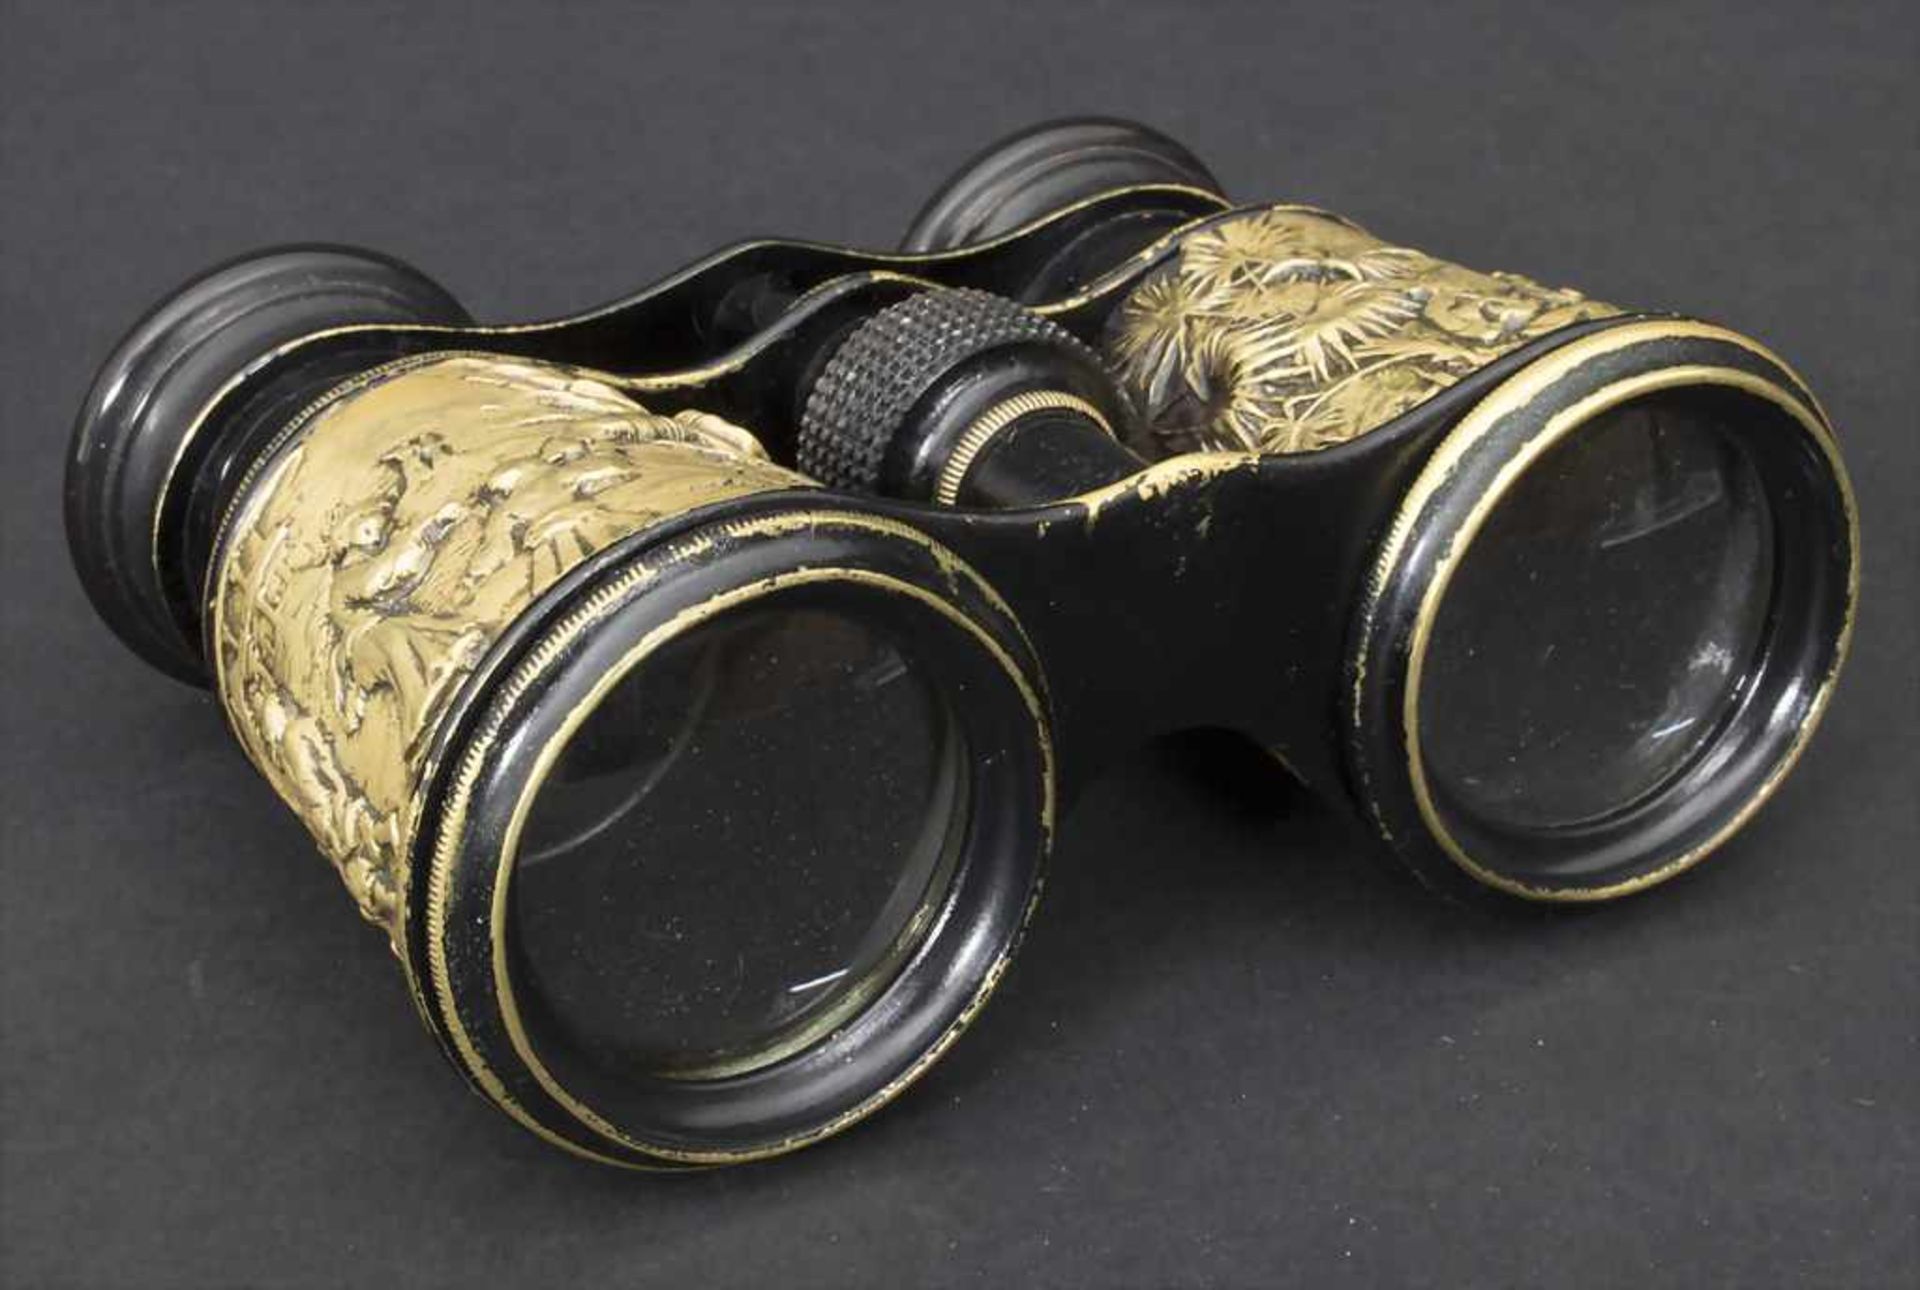 Opernglas mit Figurenrelief / Opera glasses with figural relief, Japan, um 1900Material: Messing,